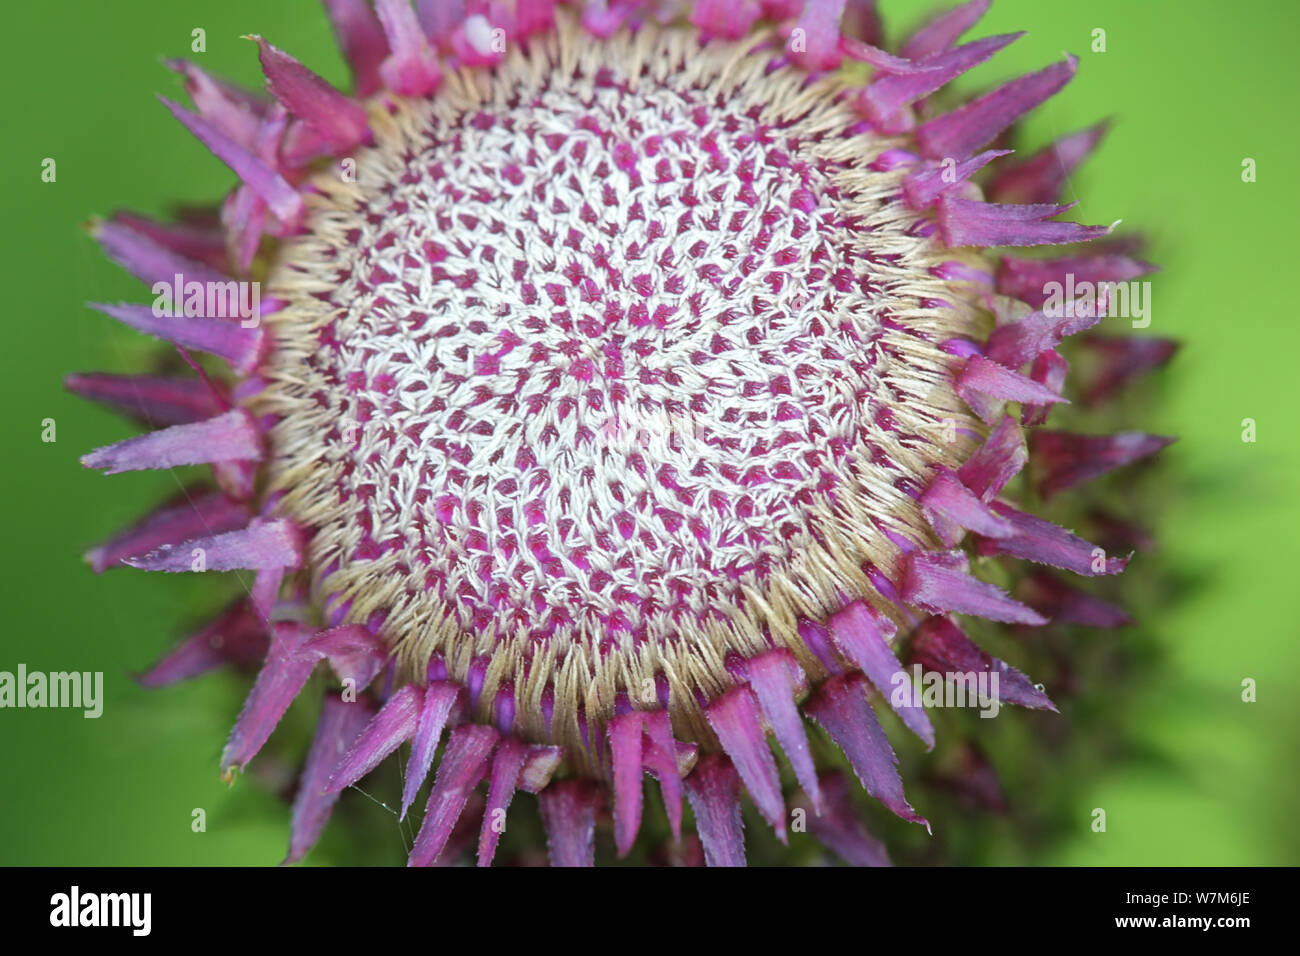 Cirsium heterophyllum, known as the Melancholy thistle, close-up of a flower bud Stock Photo